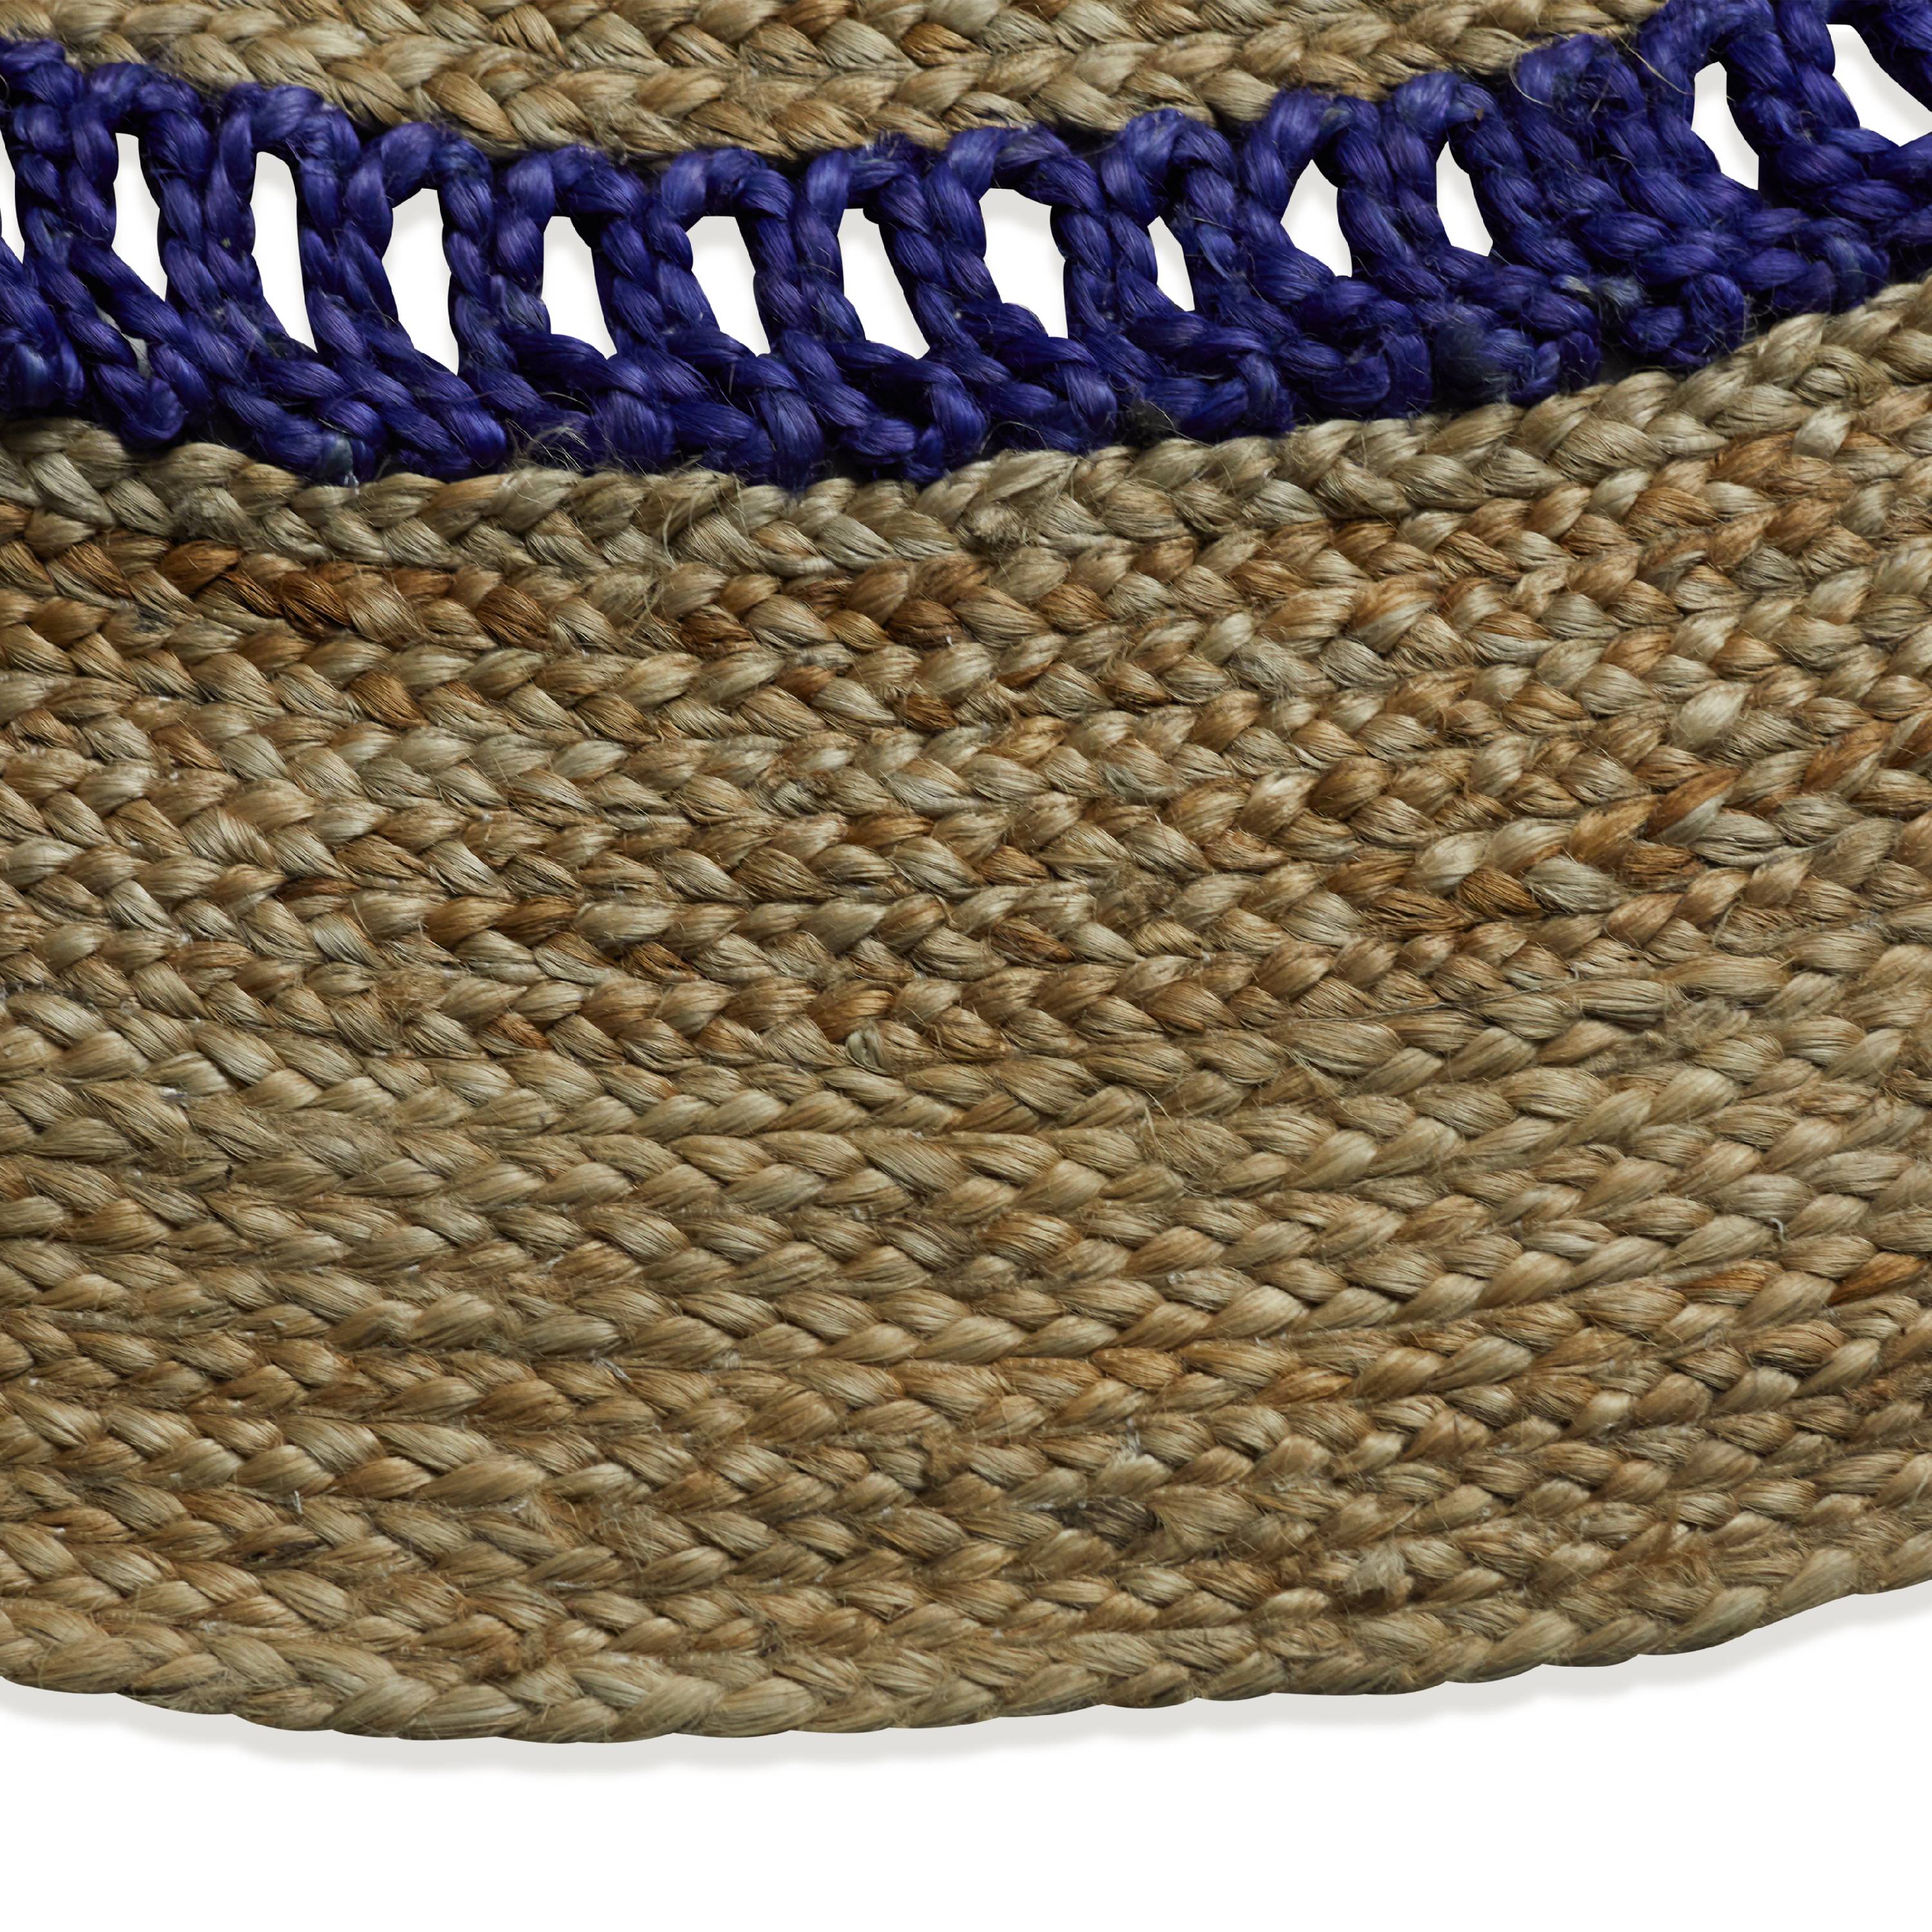 Round Blue Stripe Jute Area Rug by Drew Barrymore Flower Home - image 4 of 6